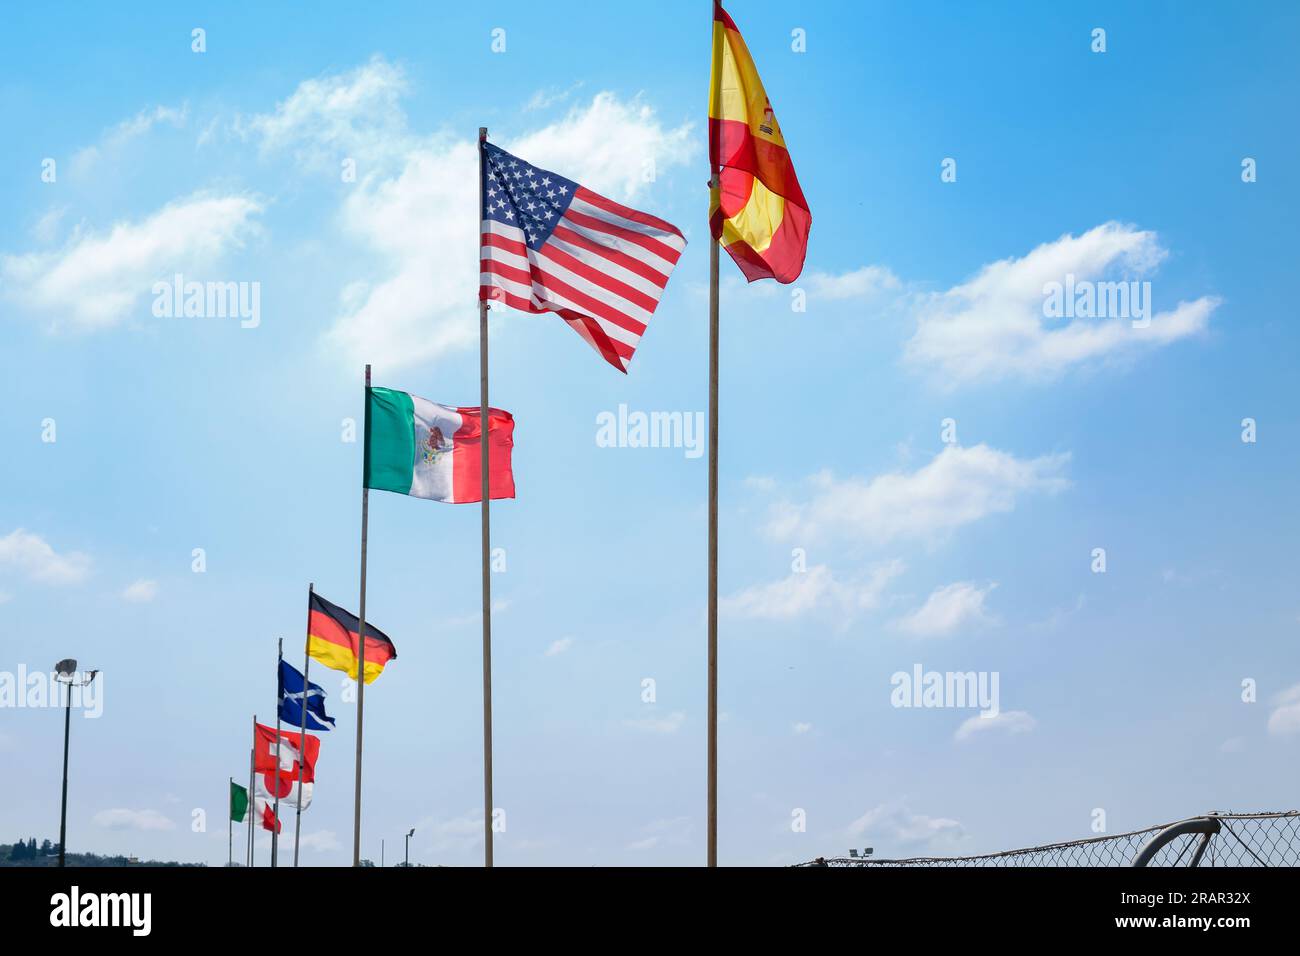 Many flags of different nations aligned waving, clear sky with light white clouds, world conference concept. Stock Photo